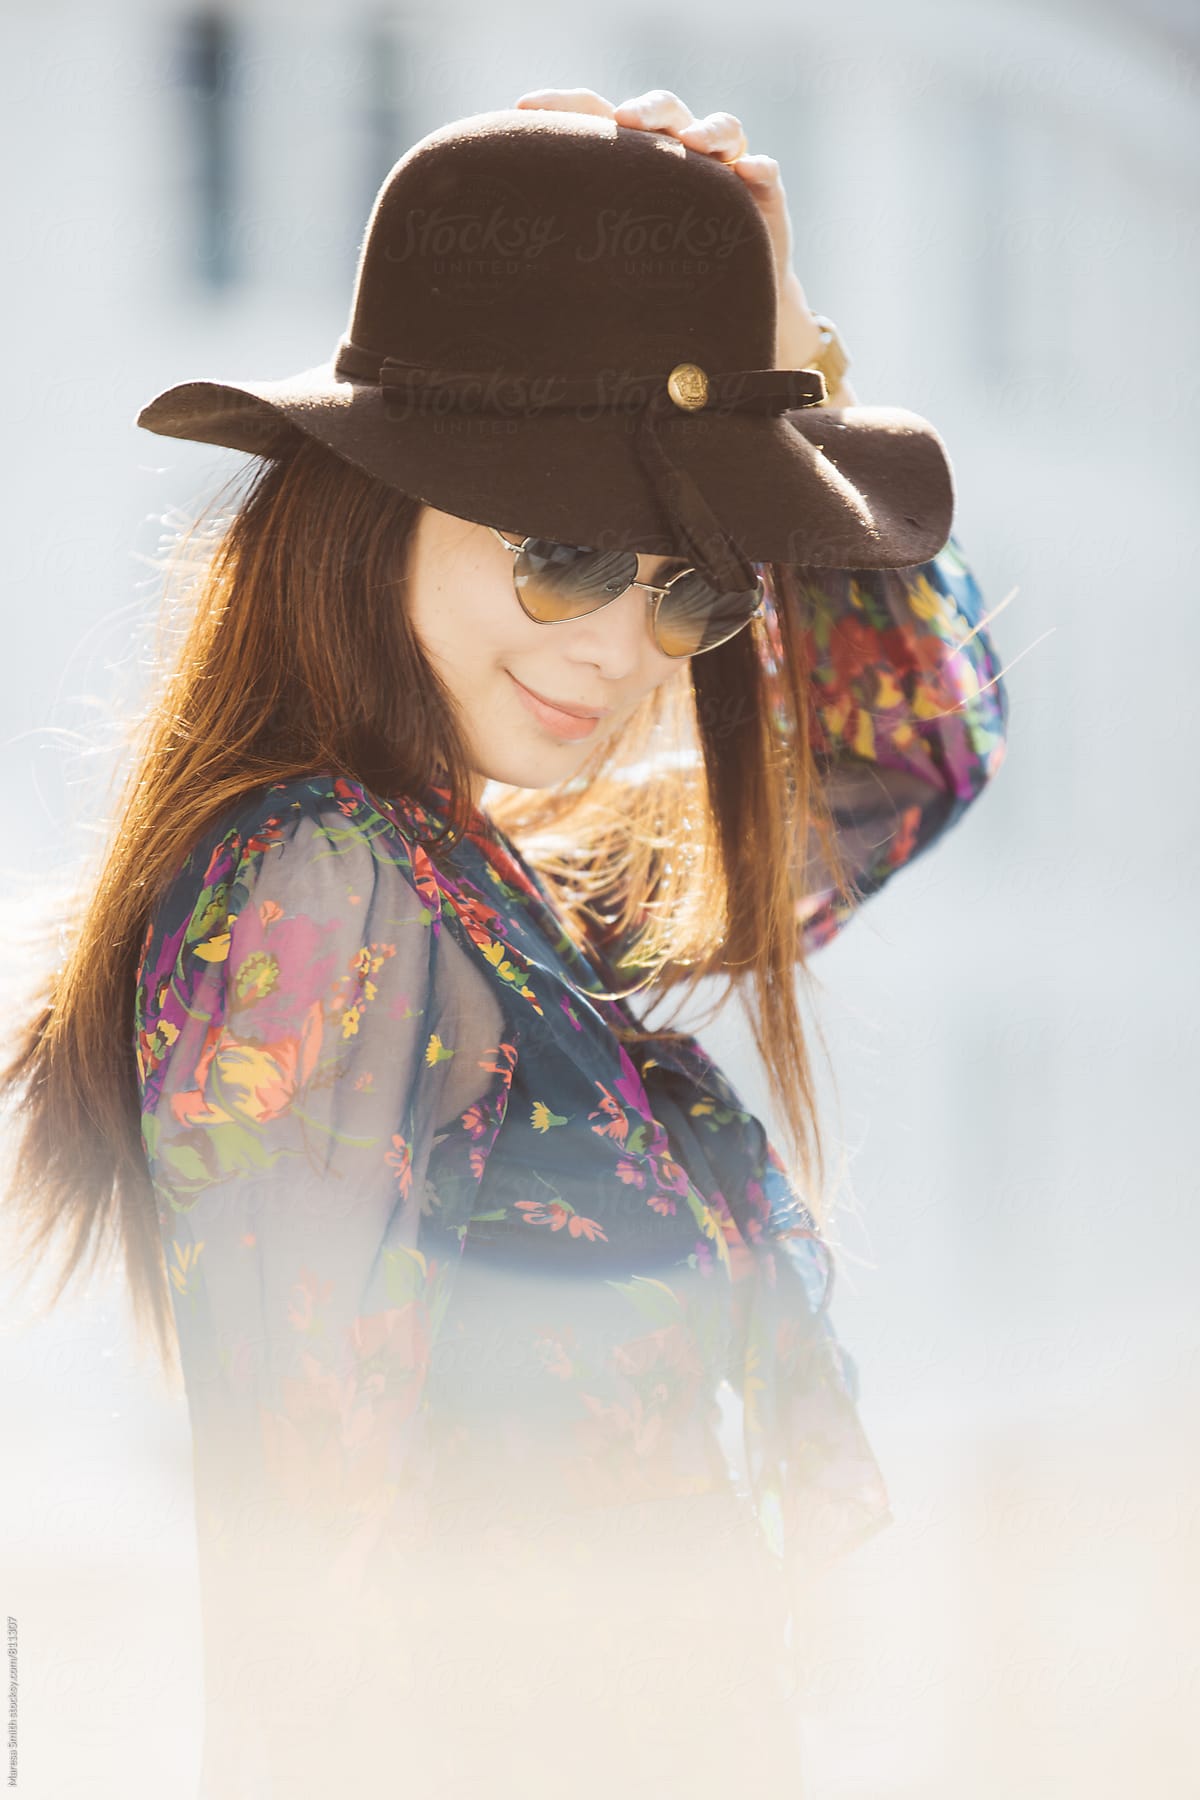 A brunette lady smiling and looking down wearing heart-shaped glasses and a floppy hat